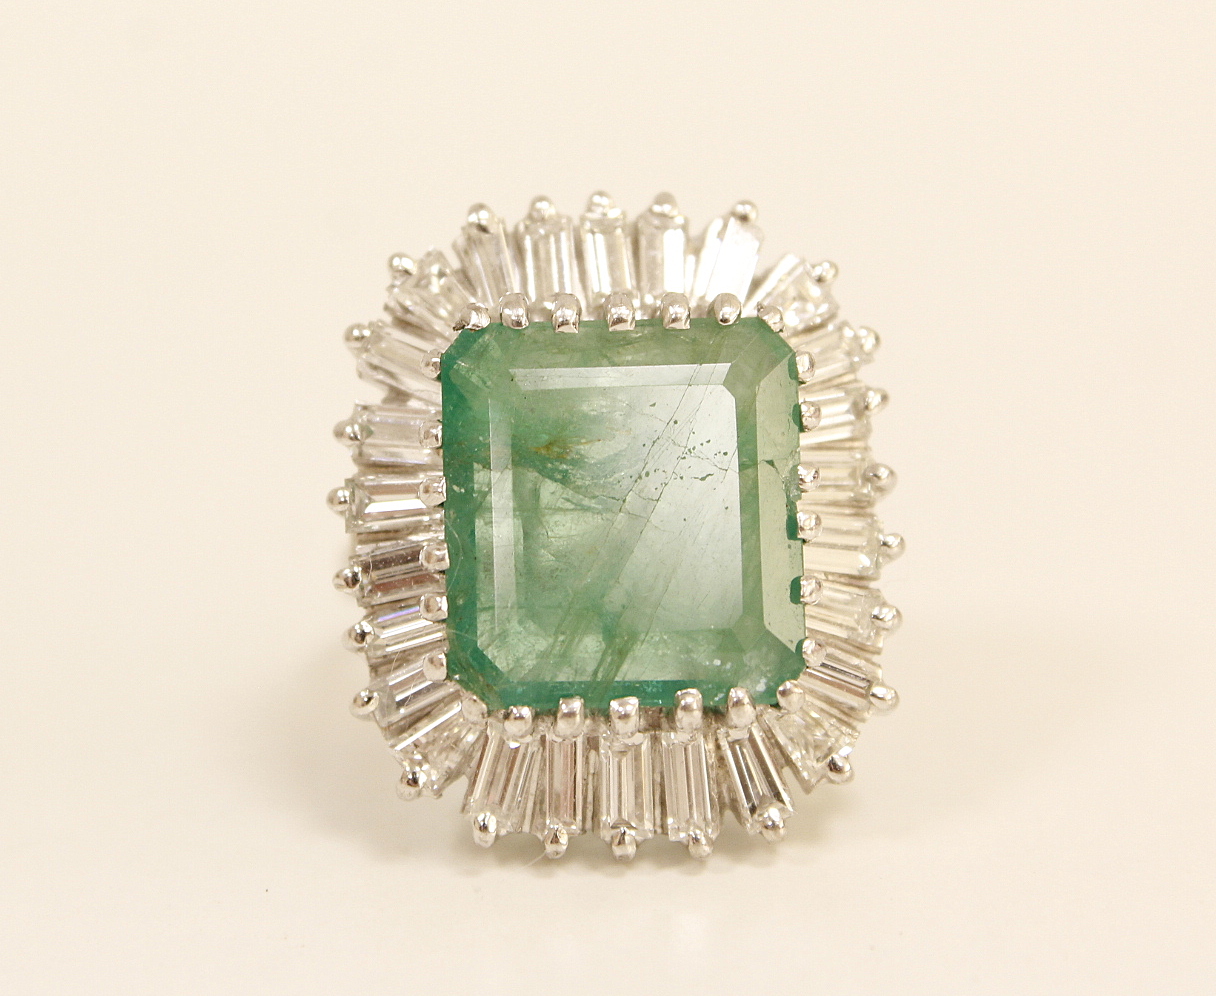 Impressive diamond and emerald cluster ring, the emerald given as approx. 3.5ct surrounded by - Image 5 of 5